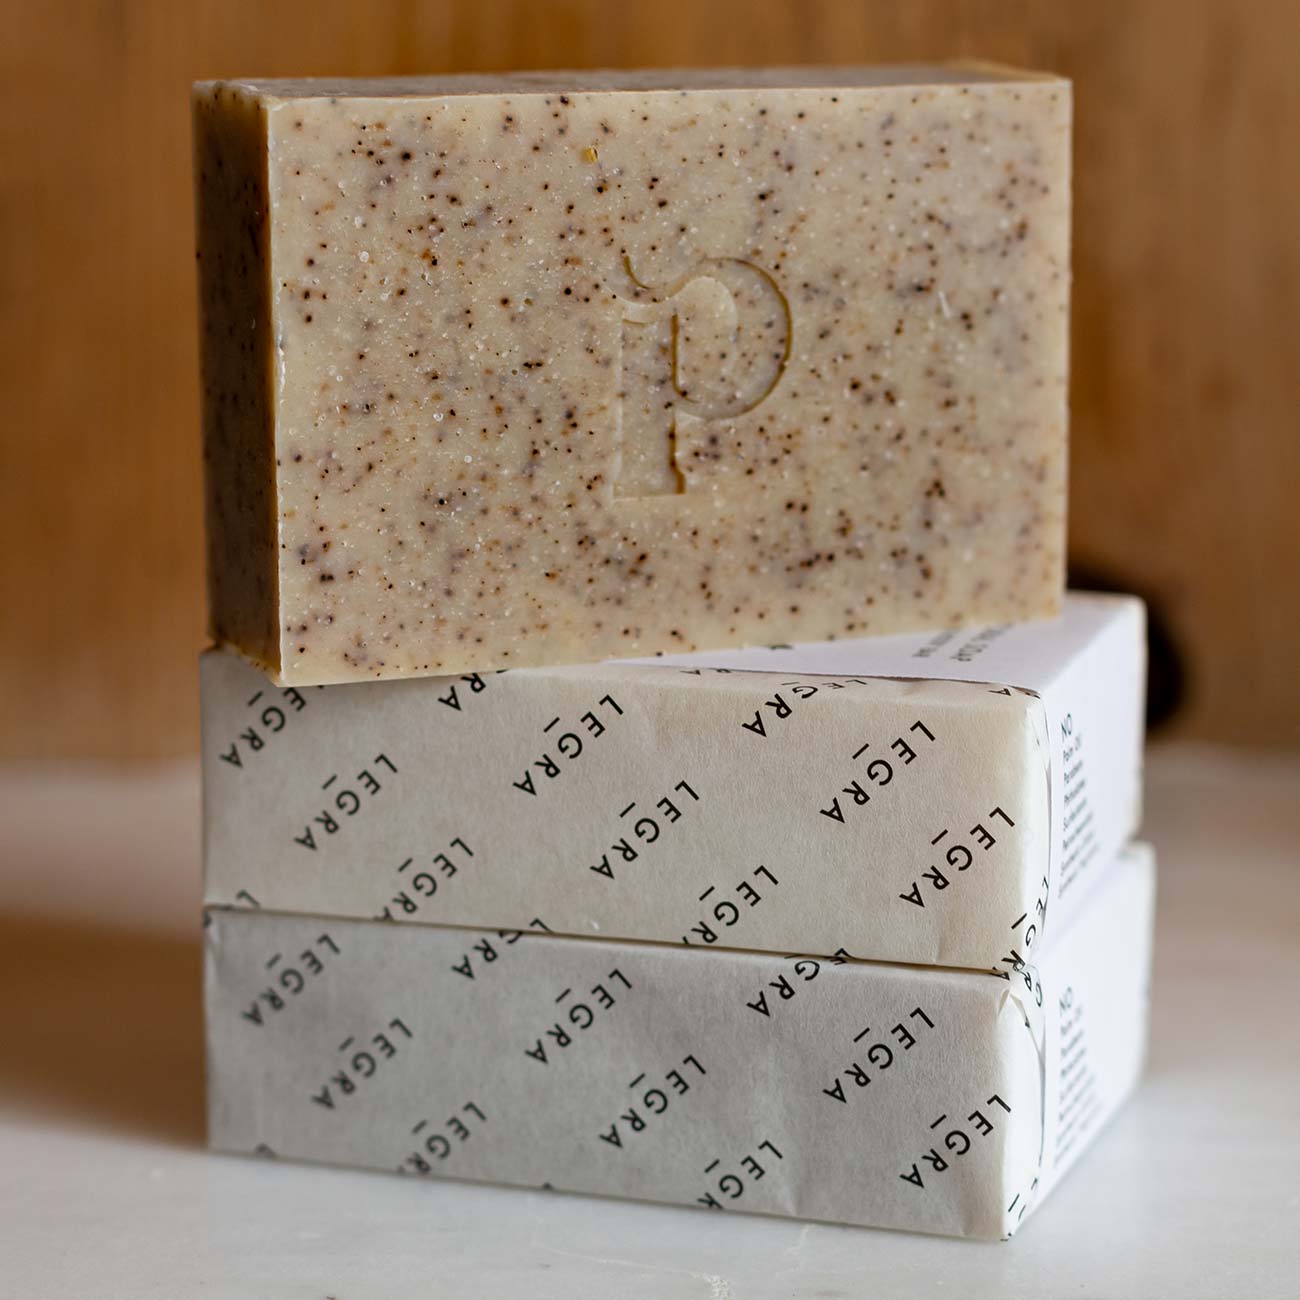 Coffee & Kaolin, Rosemary and Peppermint Soap